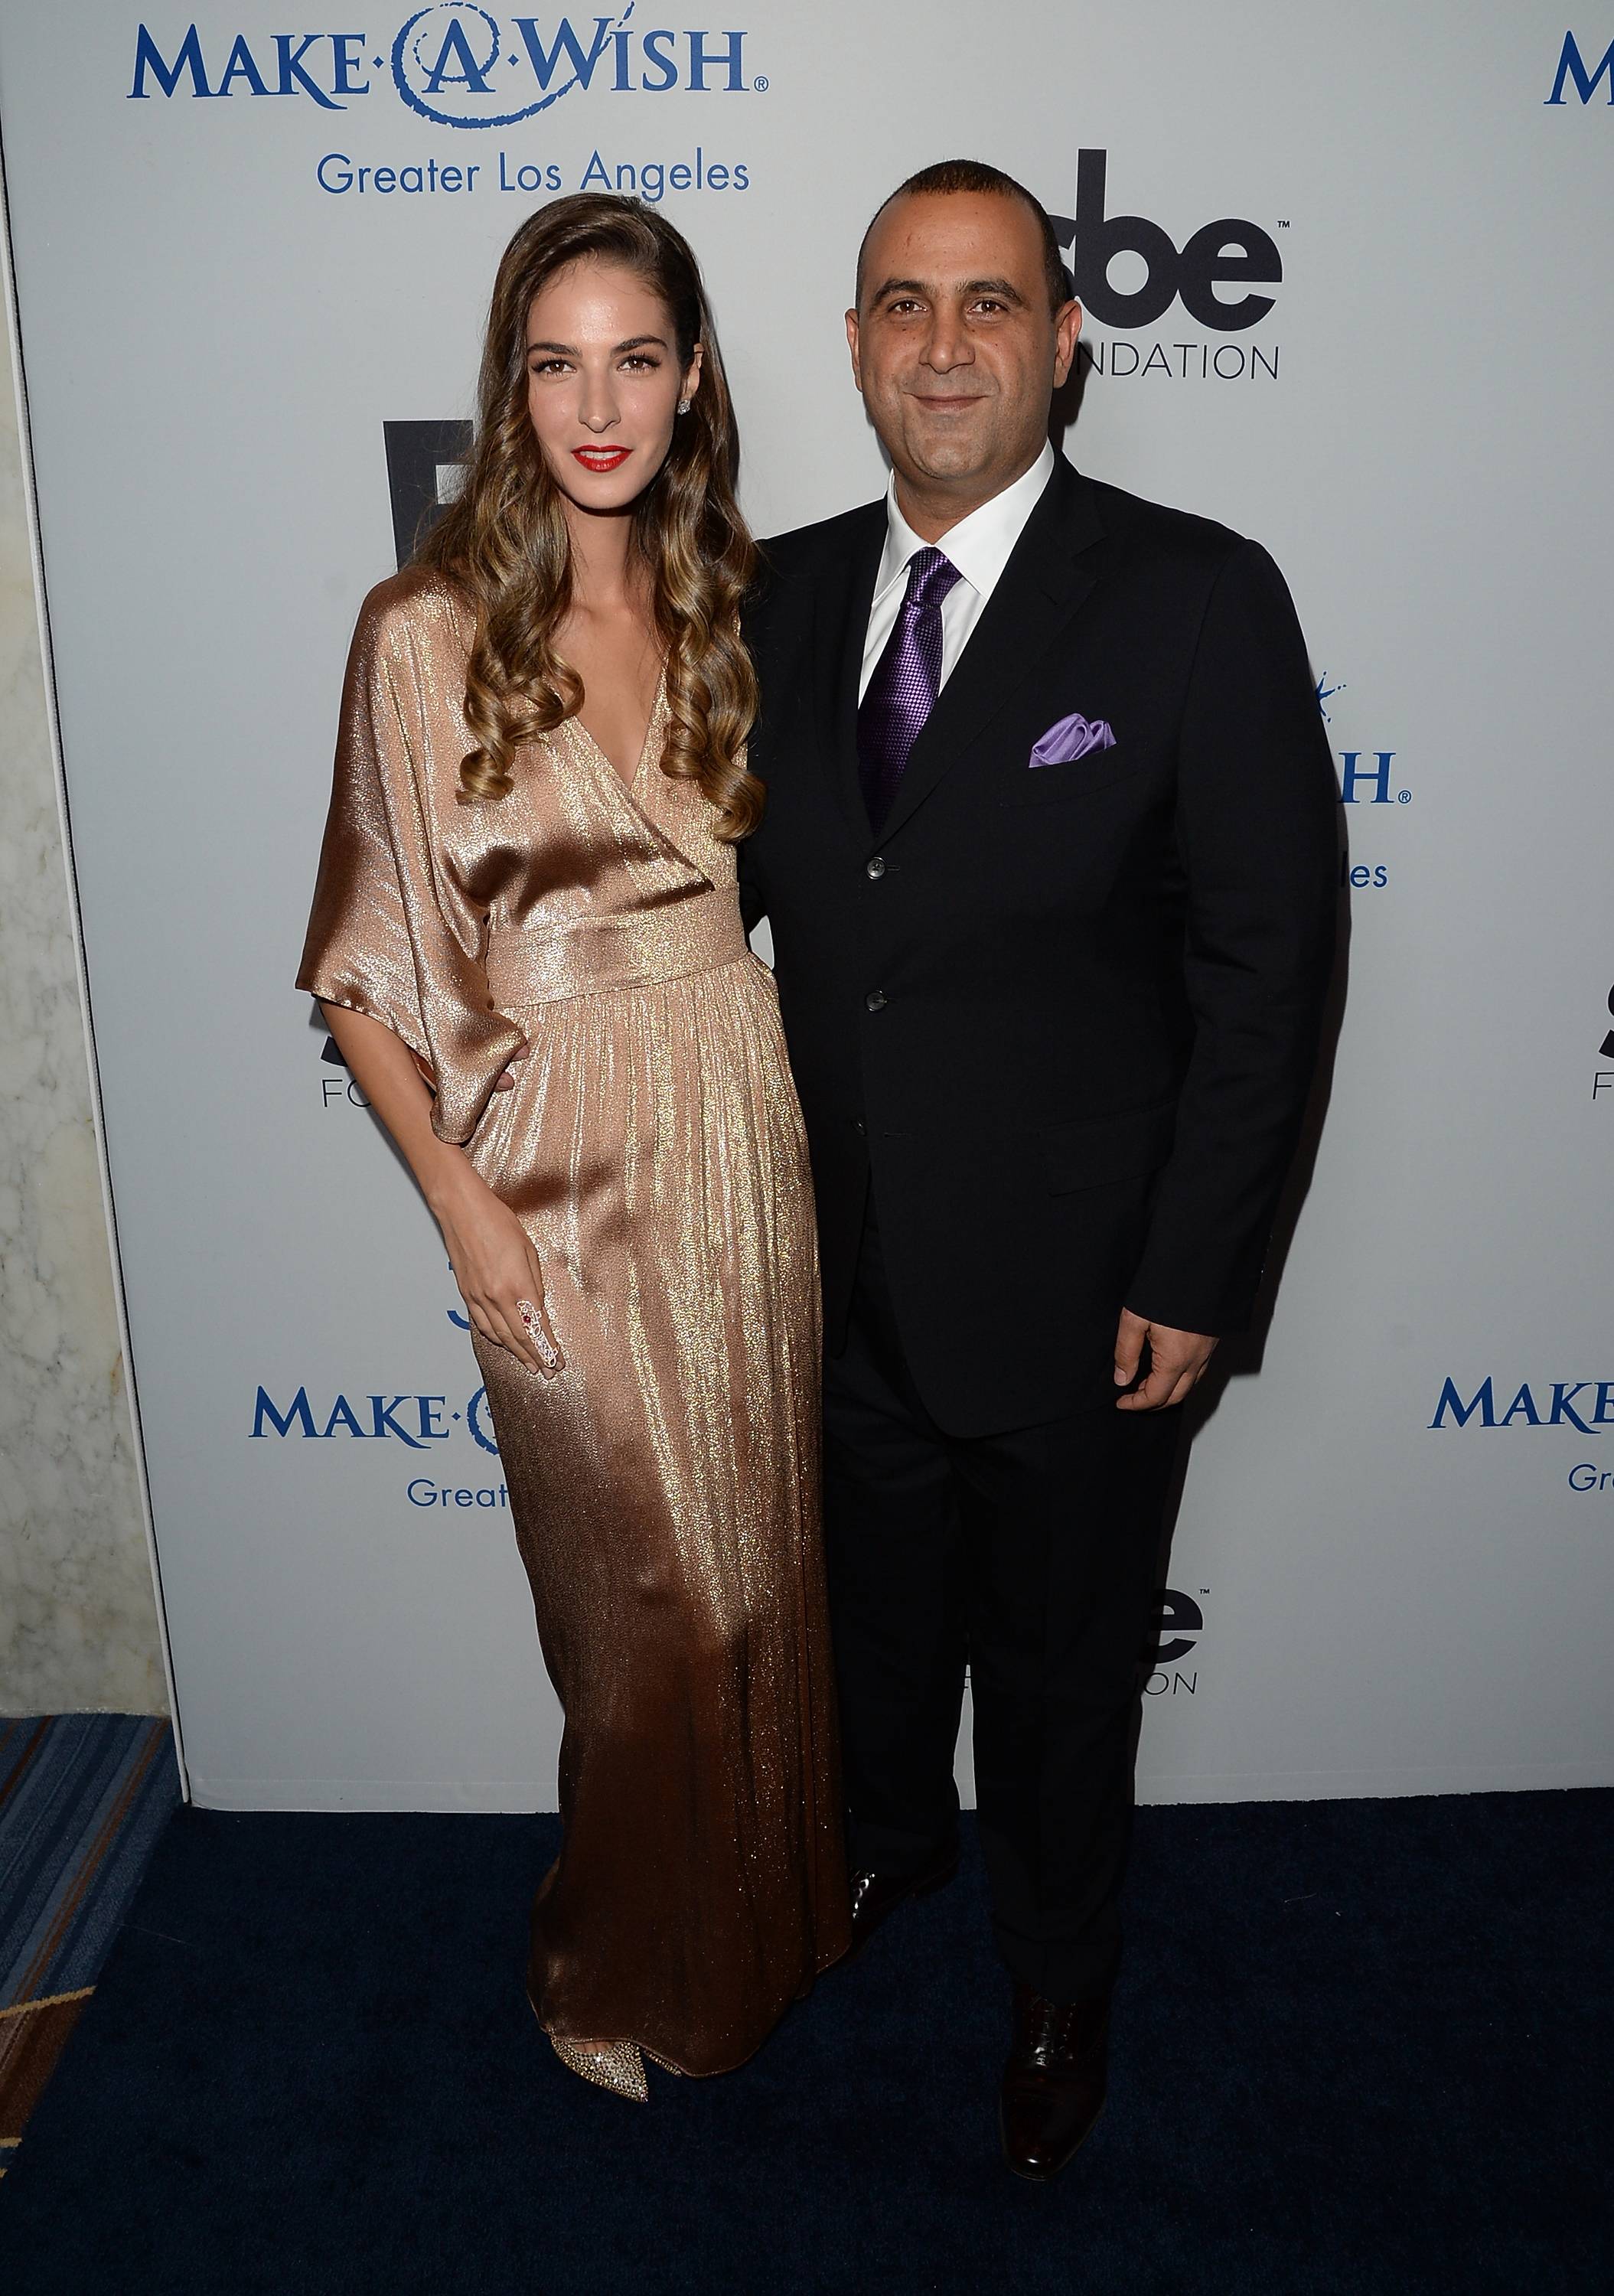 Make-A-Wish Greater Los Angeles 30th Anniversary Gala